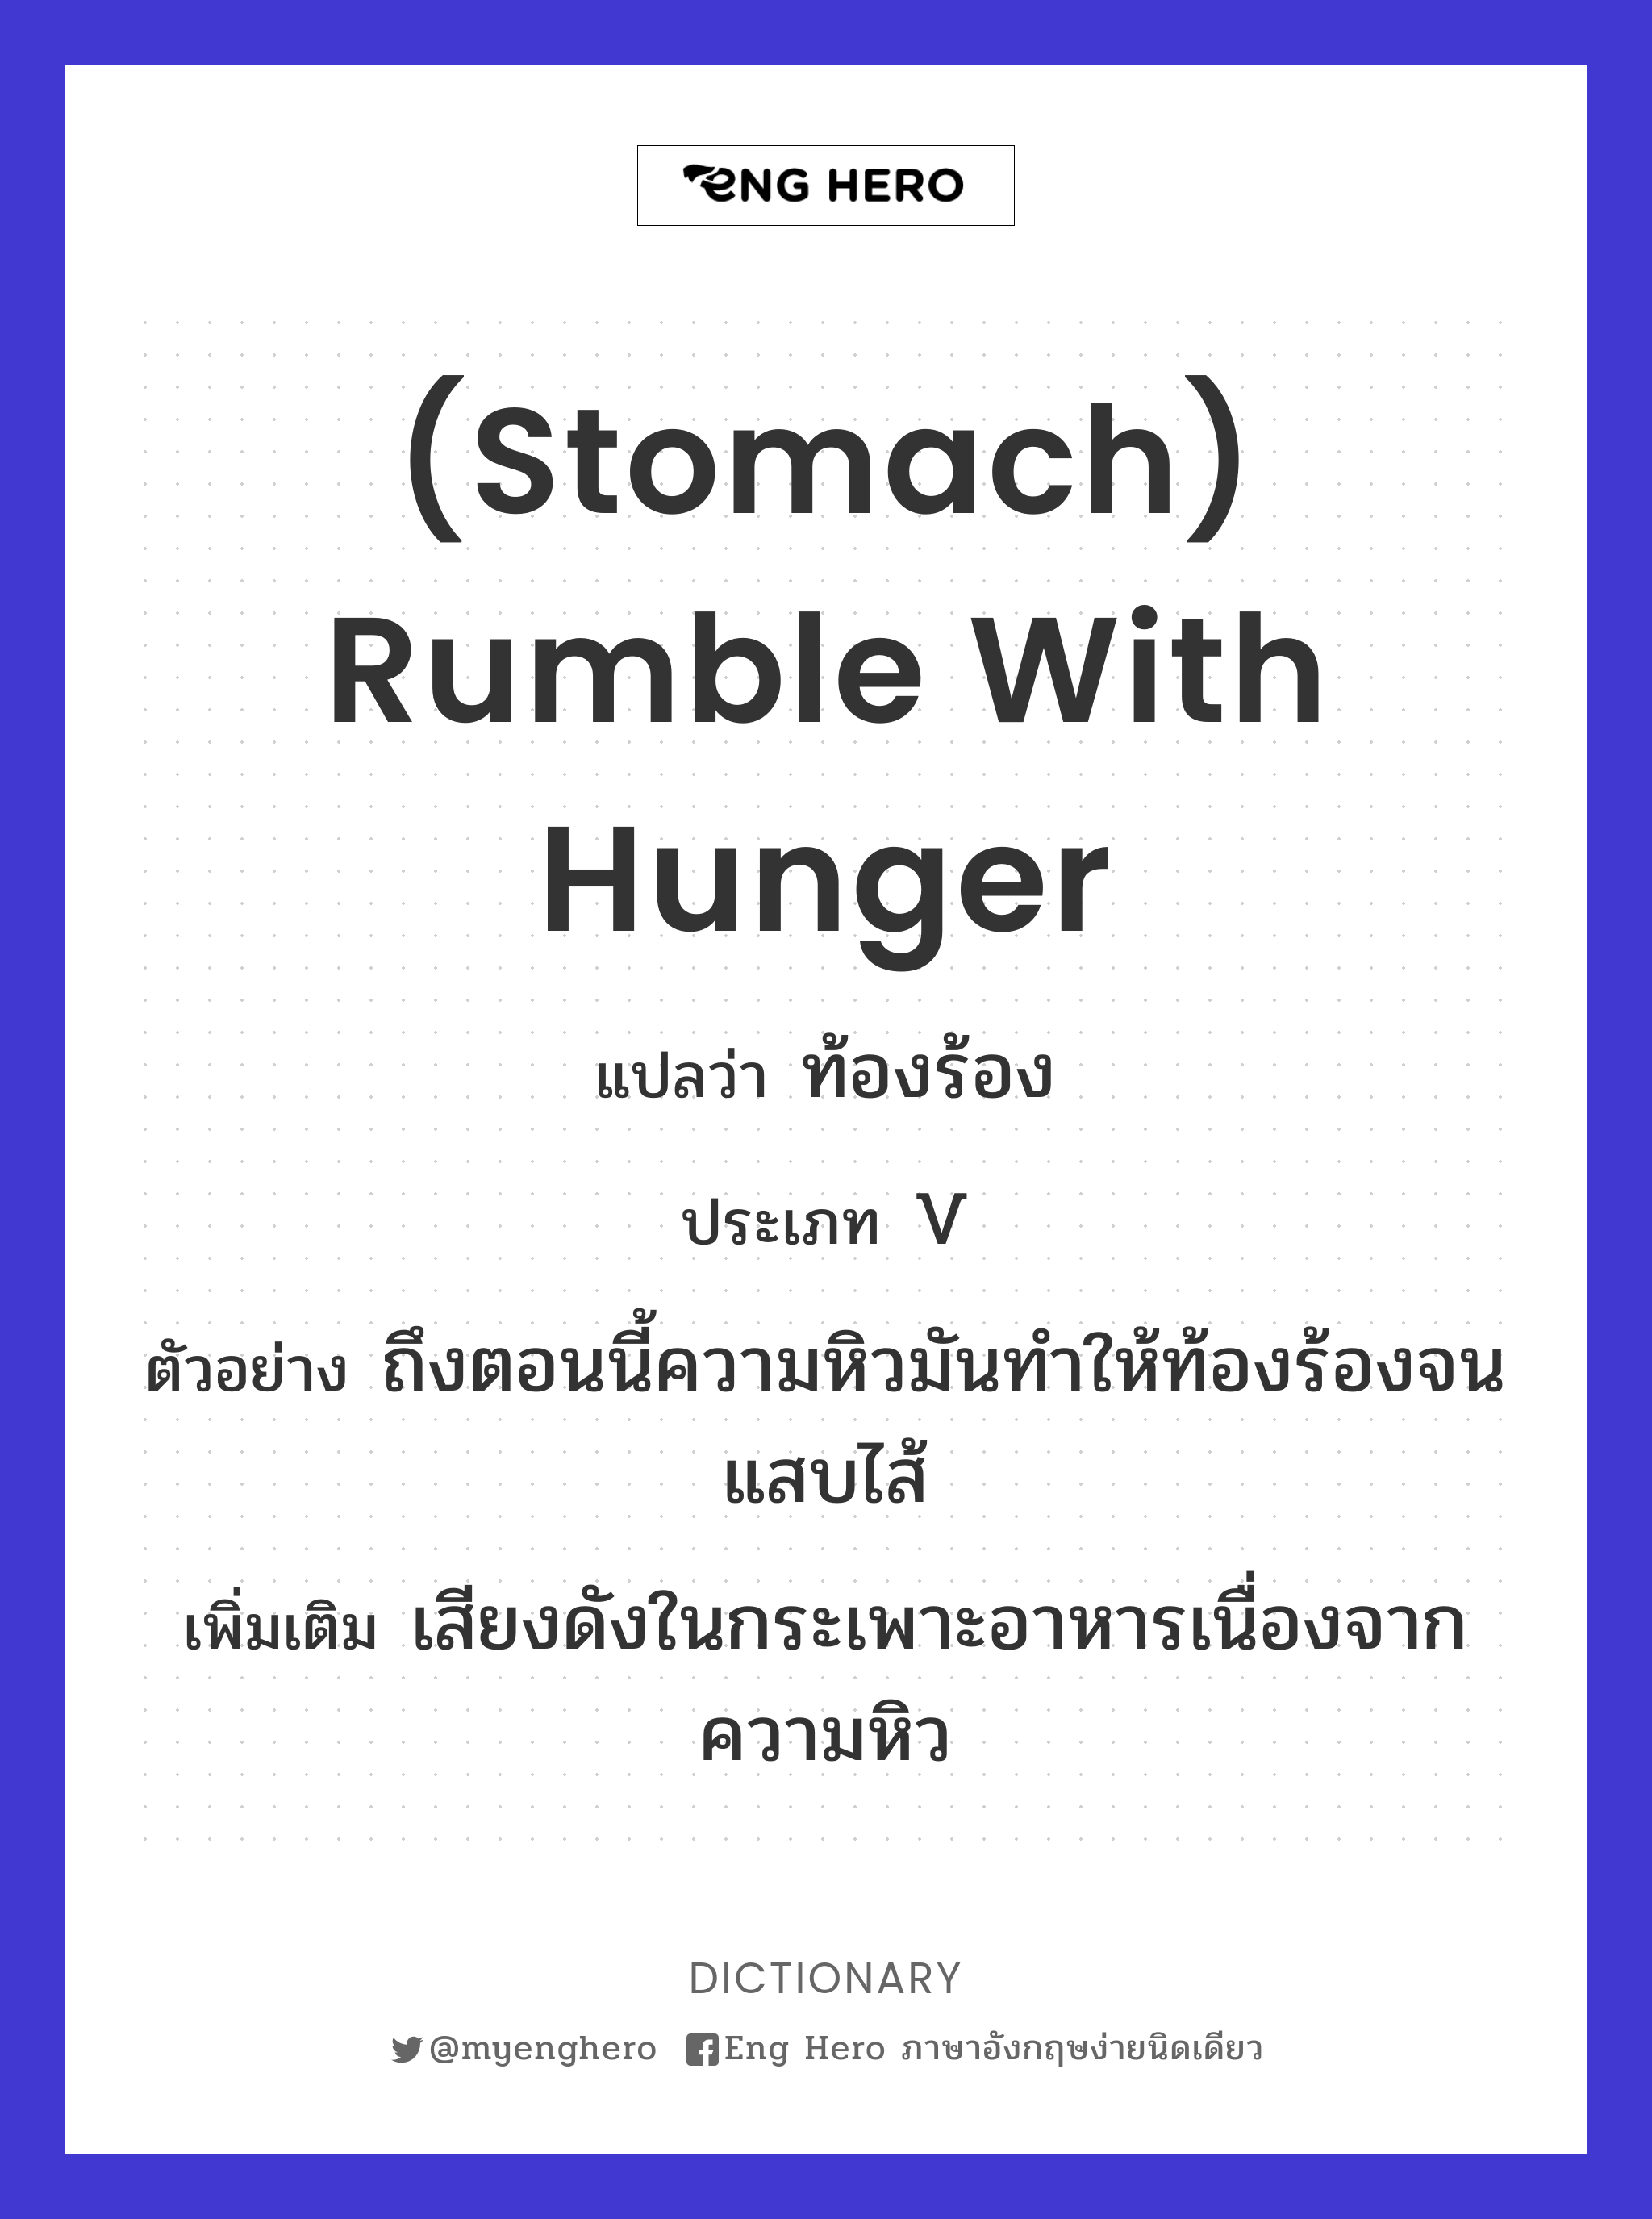 (stomach) rumble with hunger